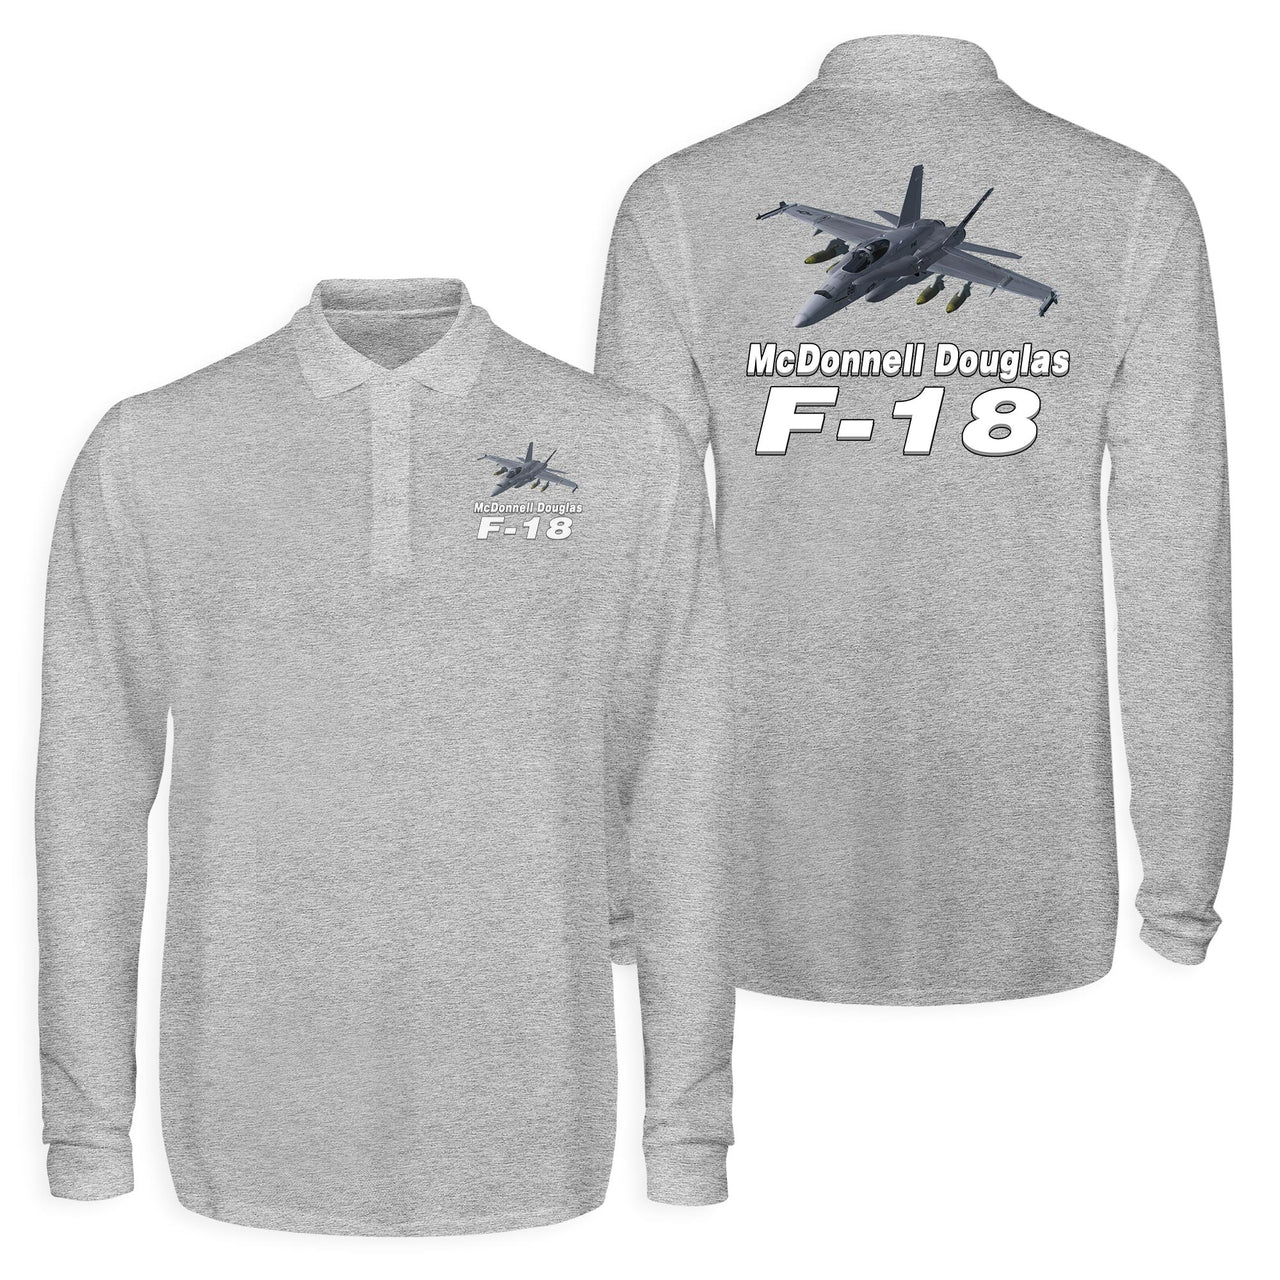 The McDonnell Douglas F18 Designed Long Sleeve Polo T-Shirts (Double-Side)